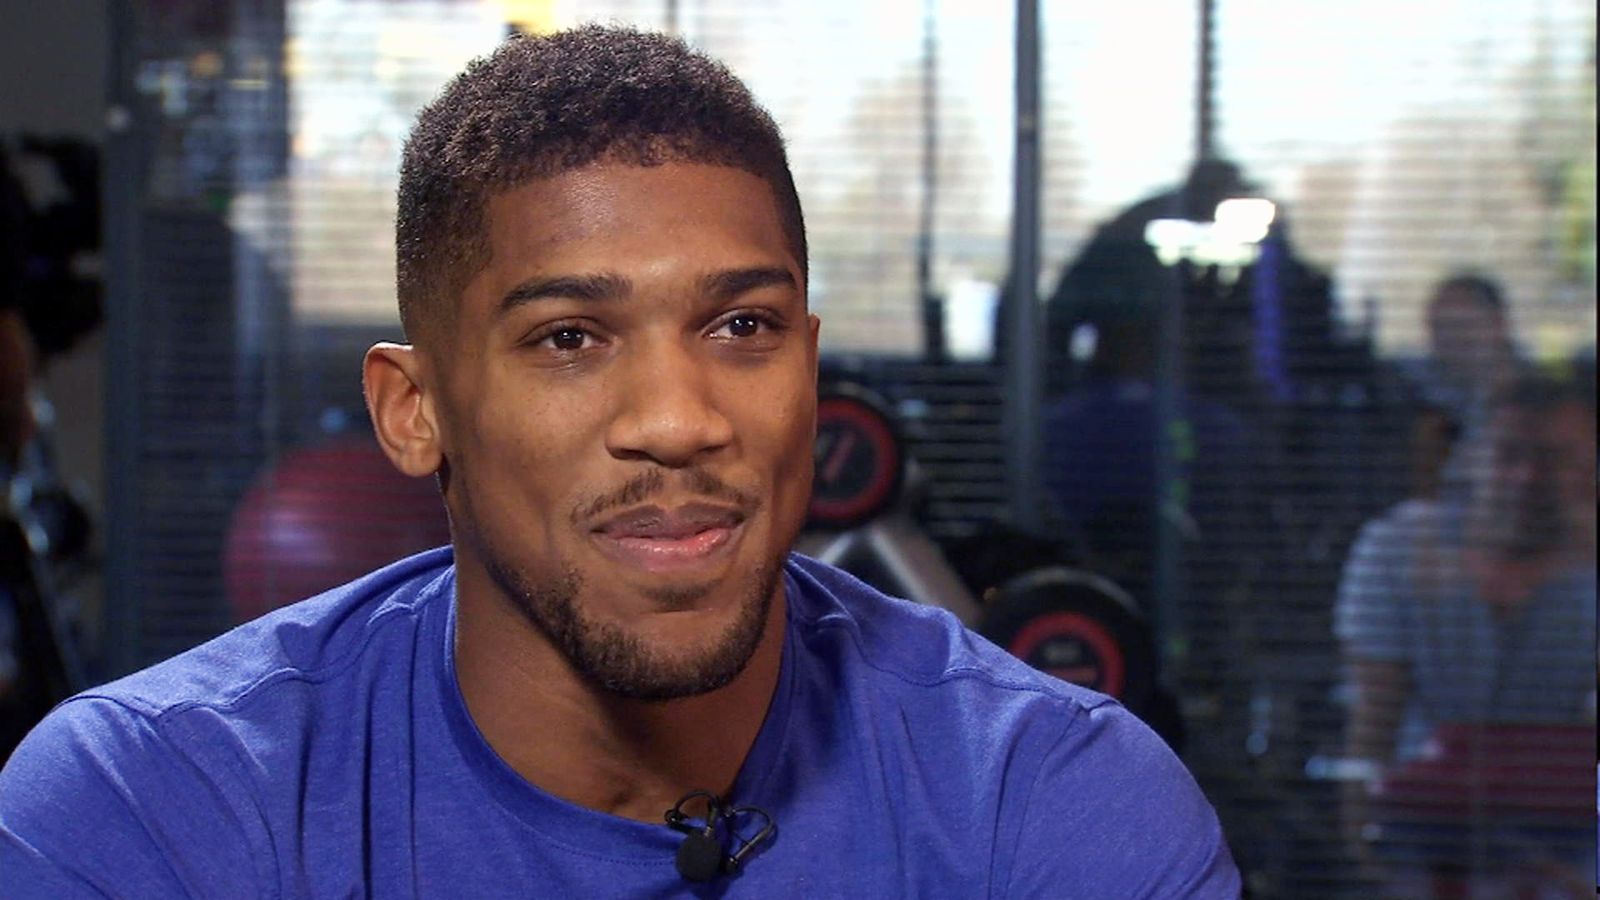 Anthony Joshua opens up to Kirsty Gallacher in exclusive interview ...